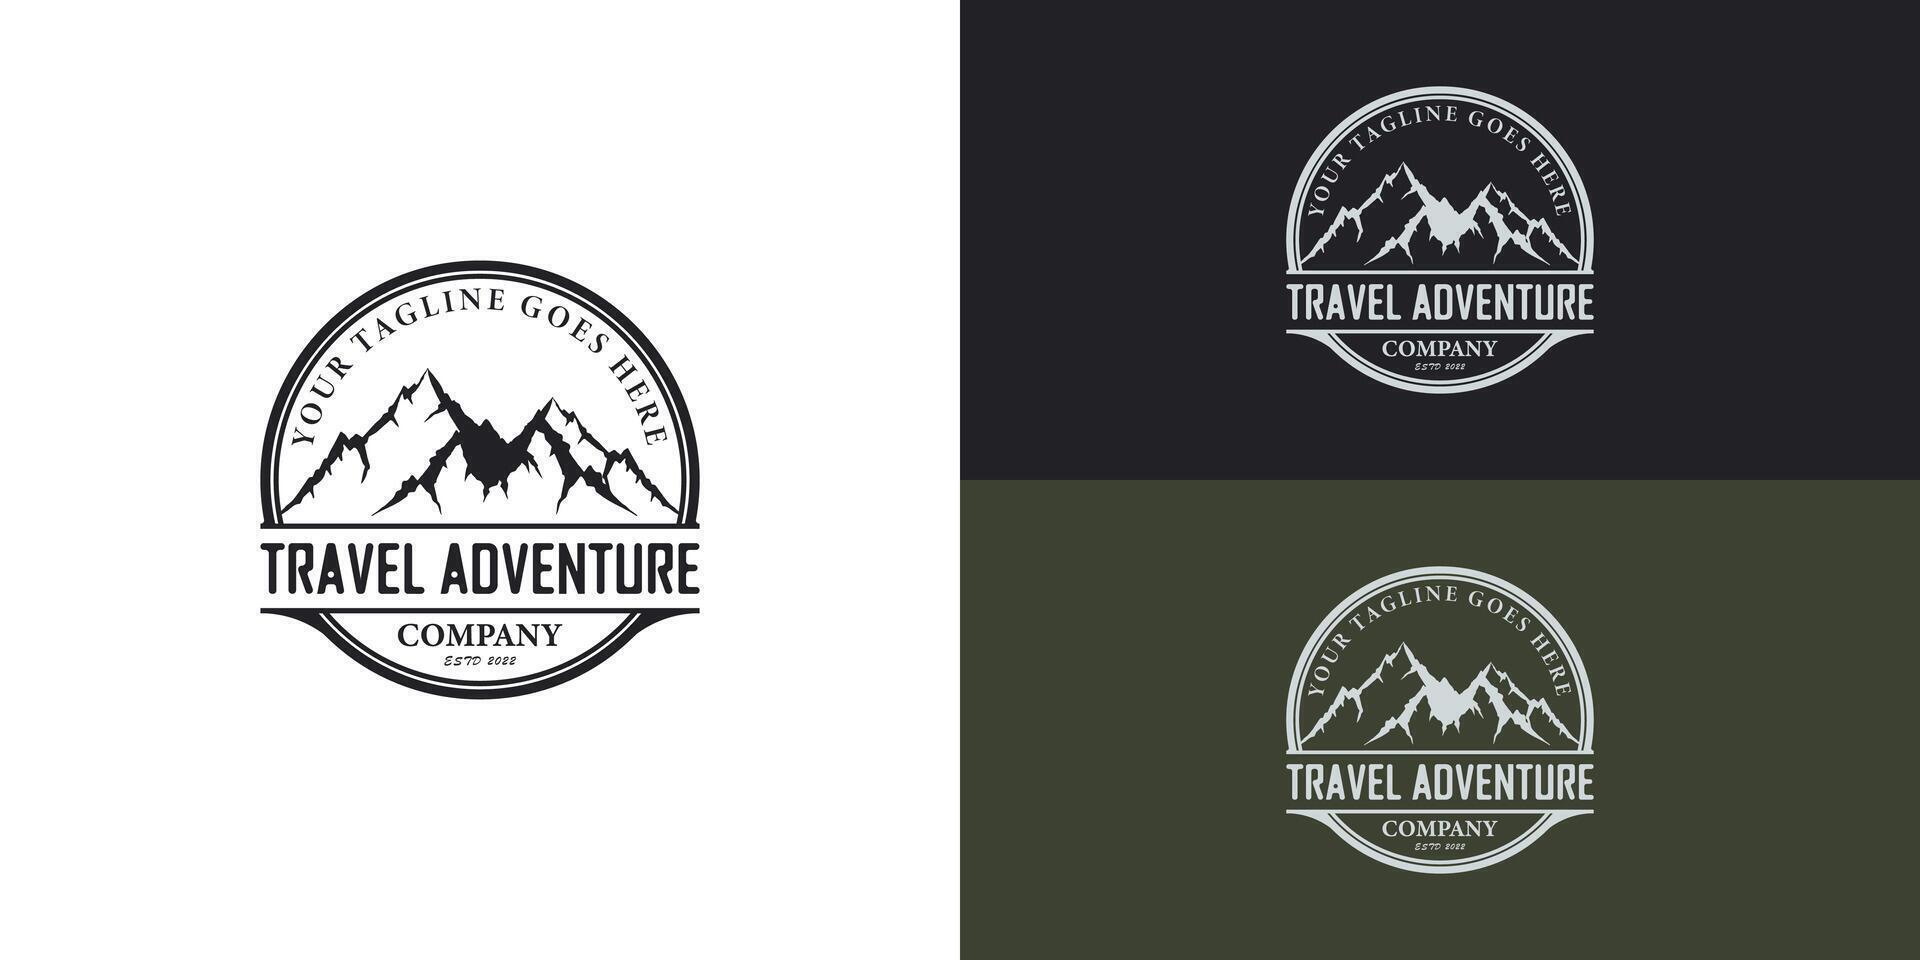 Vector Mountains travel adventure emblem in black color presented with multiple background colors. The logo is suitable for Outdoor activity business logo design inspiration templates.